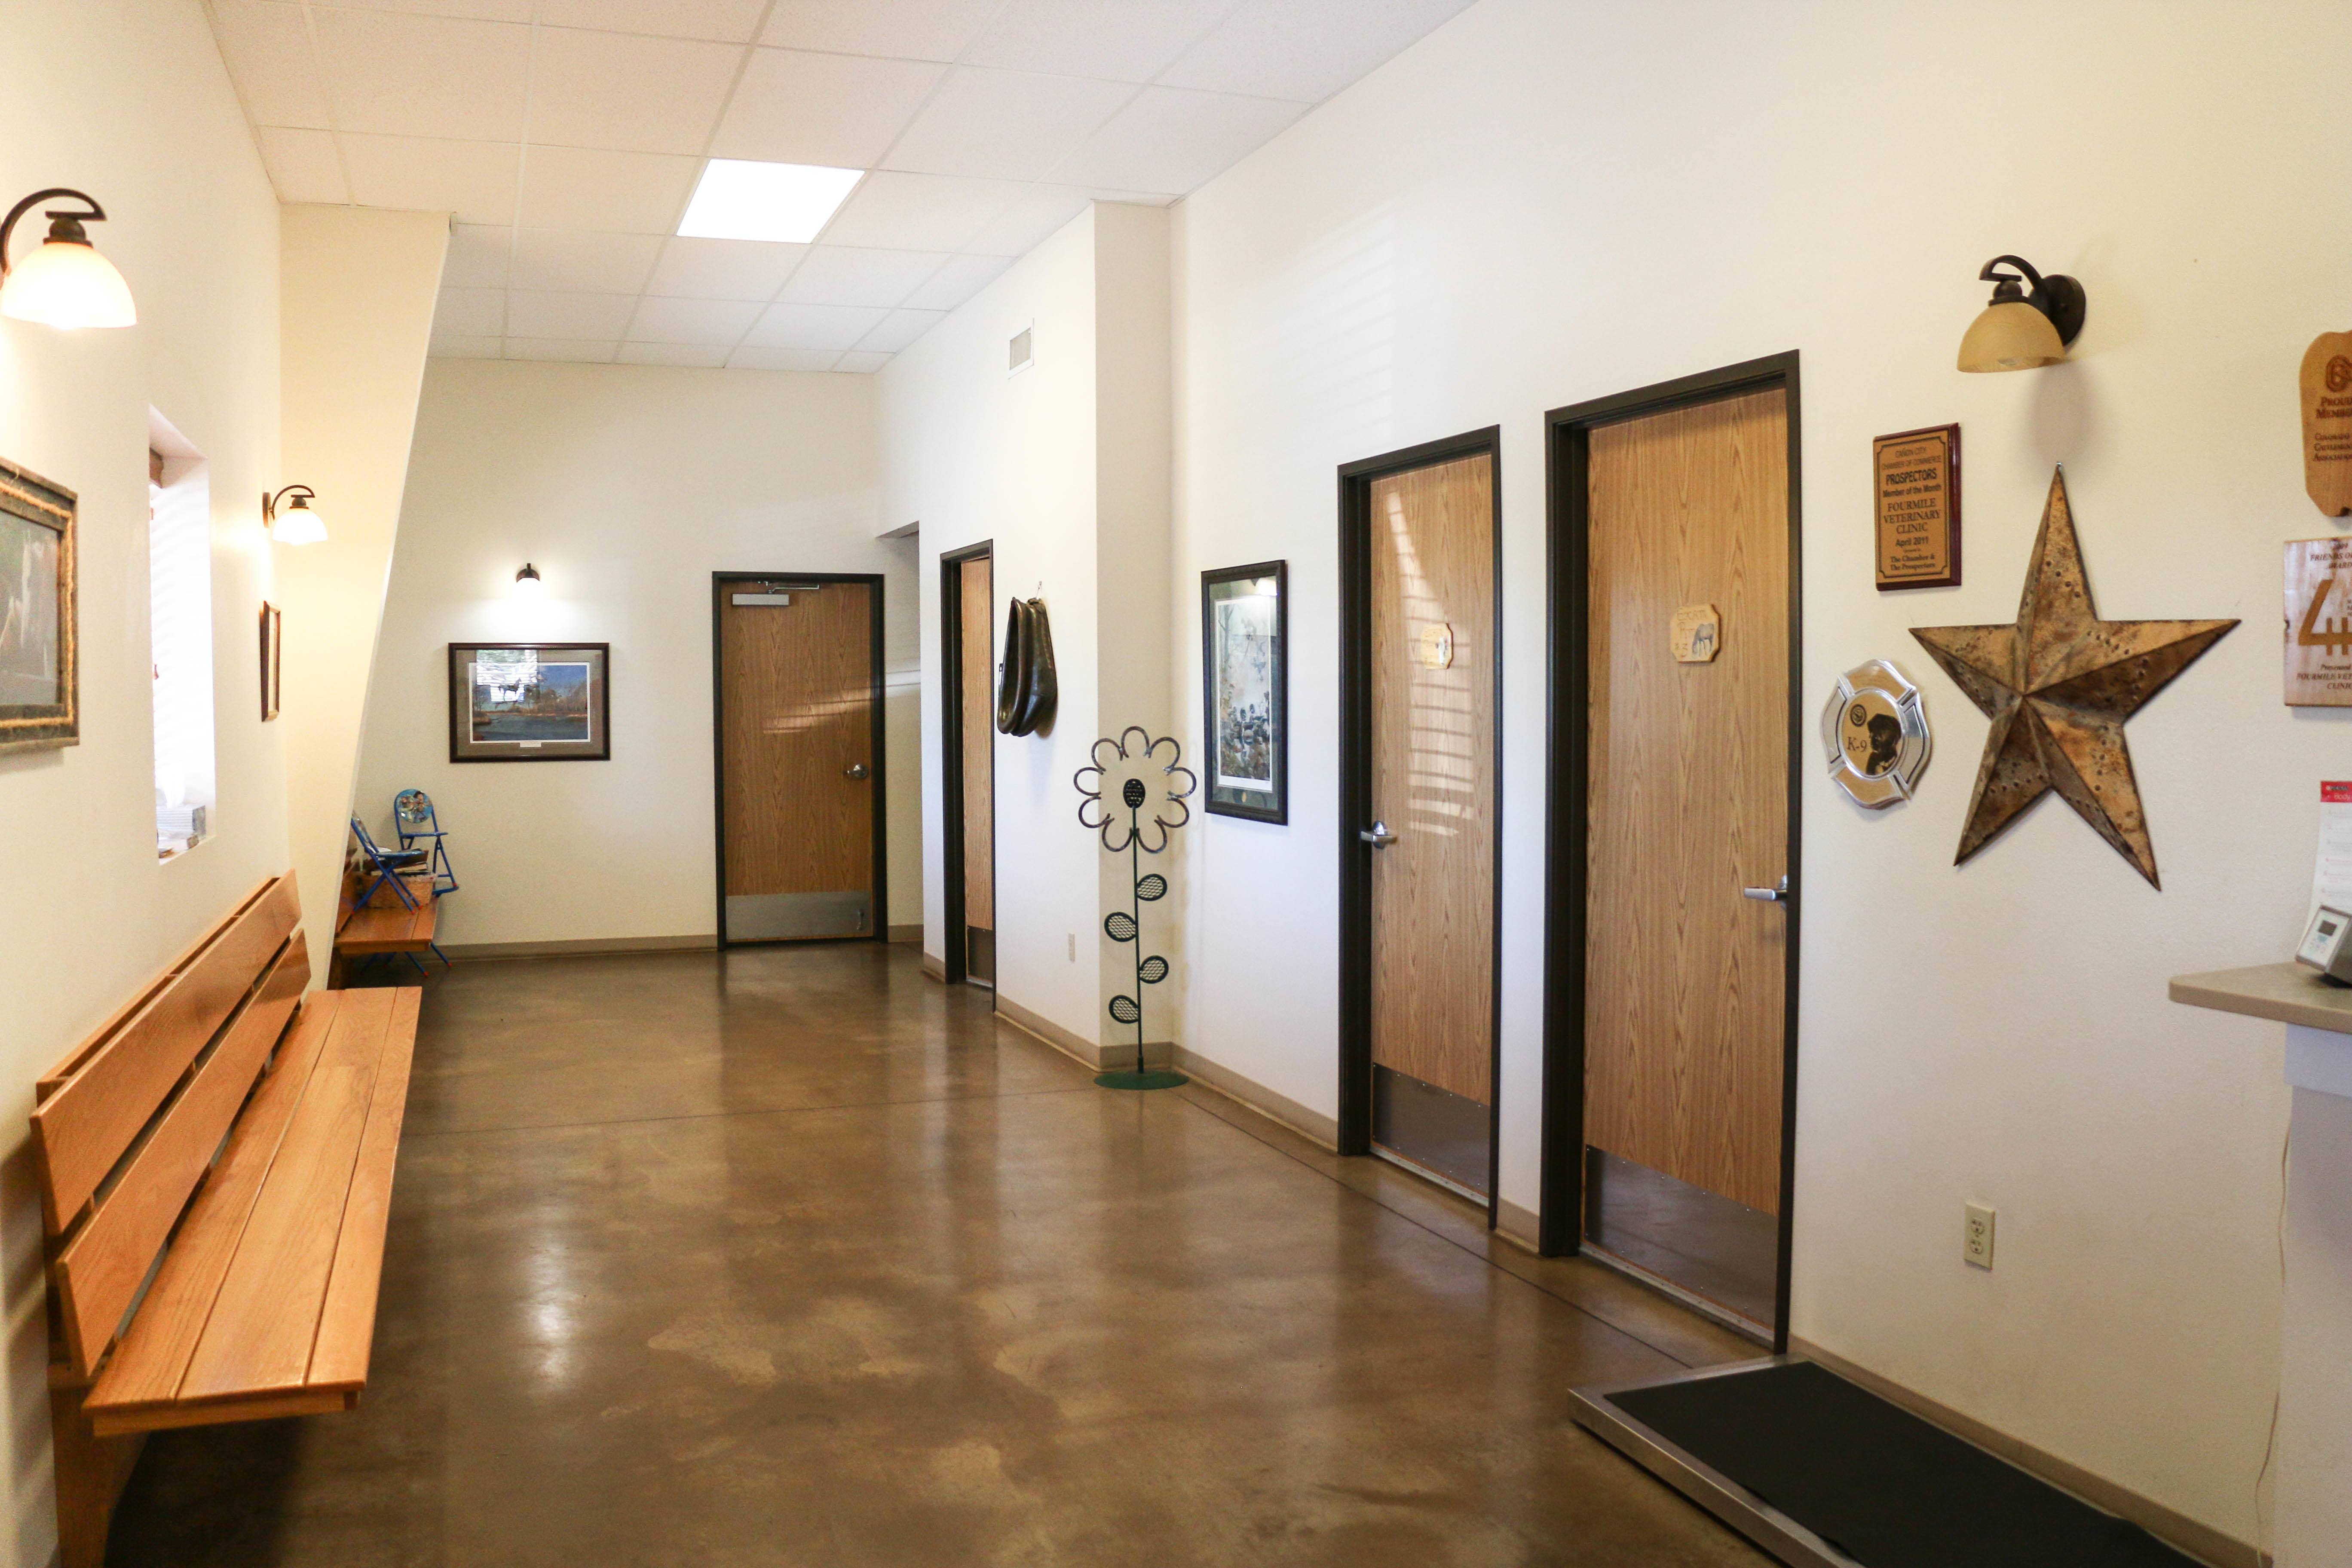 Our waiting room is always kept bright and clean to make your visits as comfortable as possible.